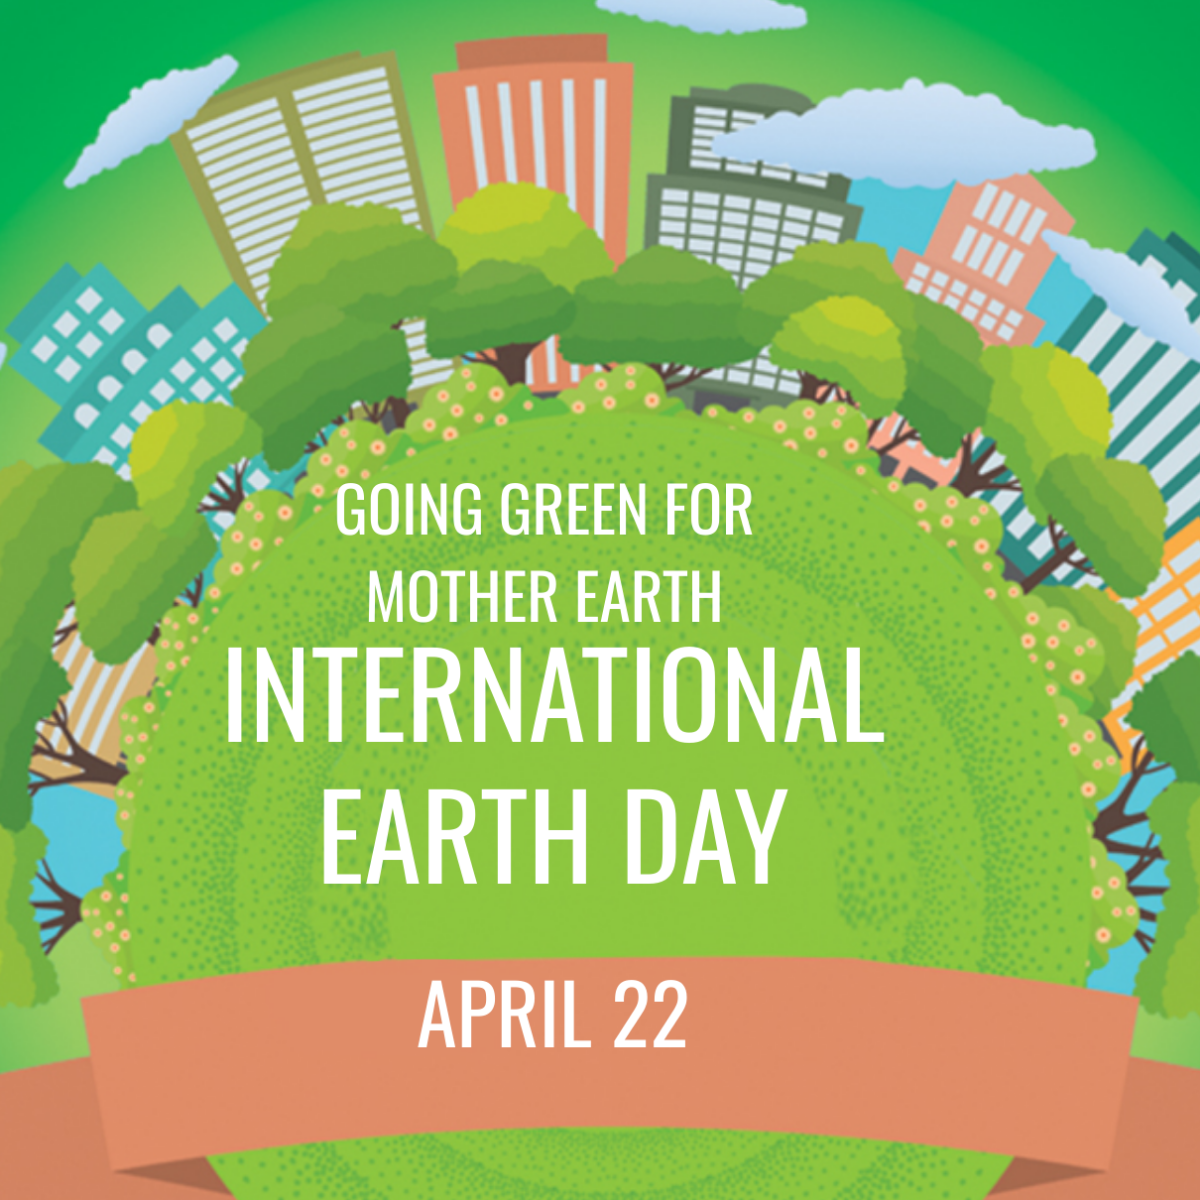 Free International Earth Day Instagram Profile Photo Template